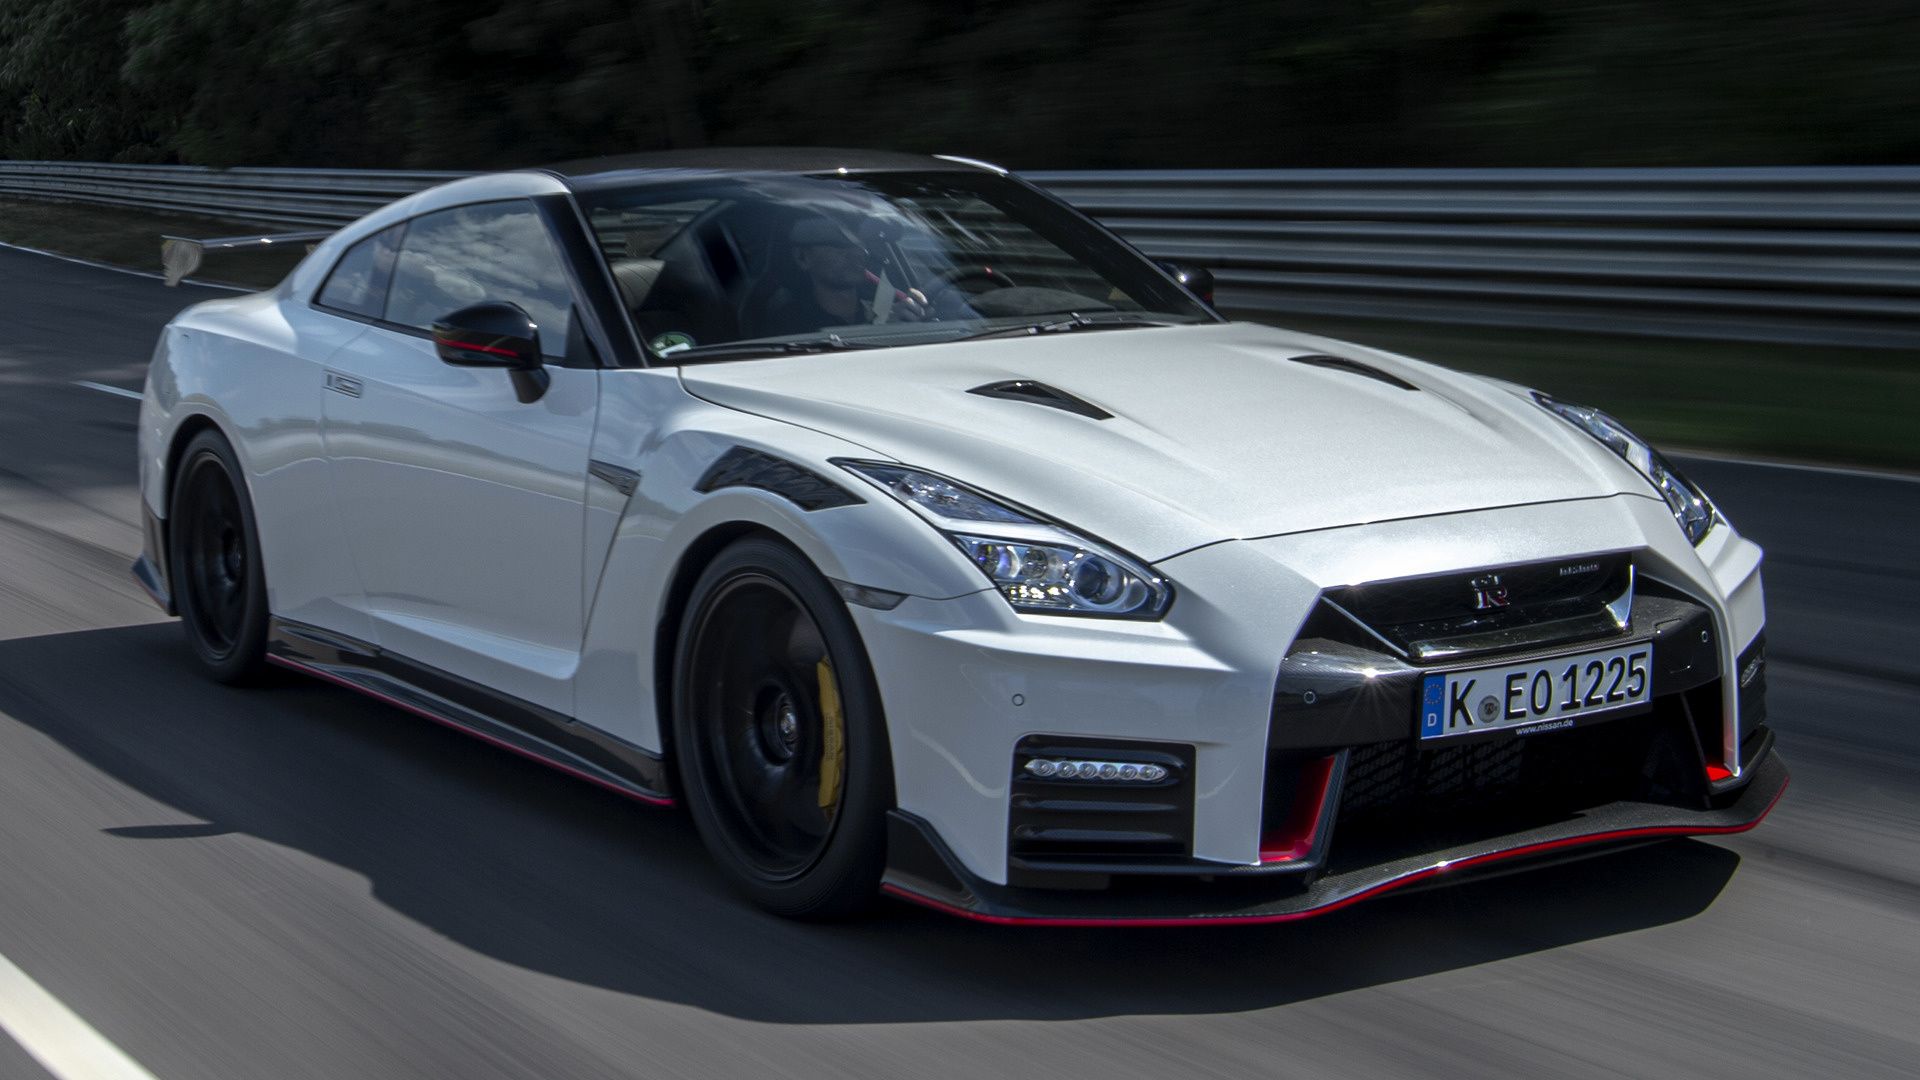 2019 Nissan GT-R Nismo: Sports Coupe wanting to race but able to socialize.